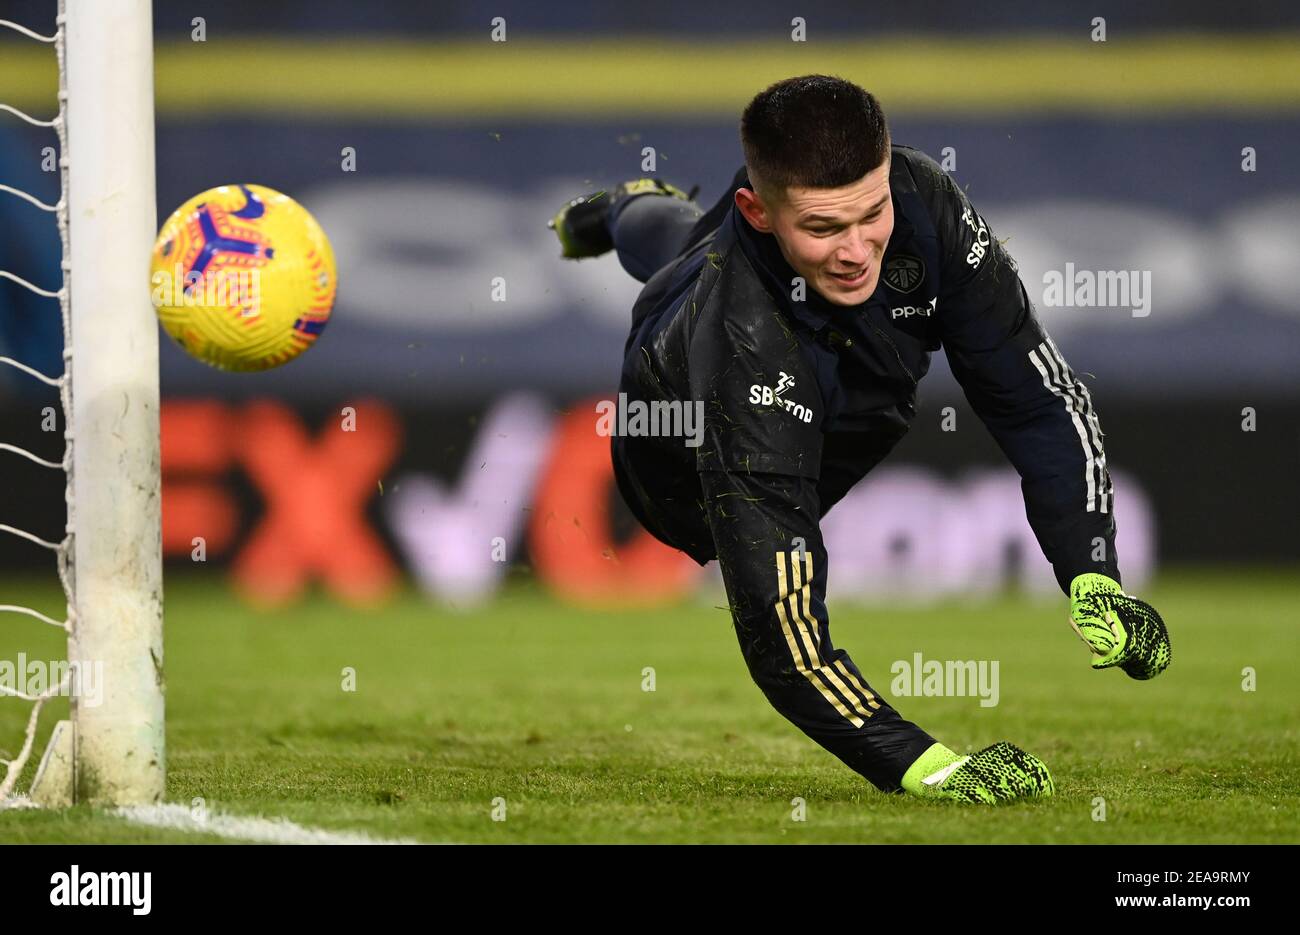 Leeds United goalkeeper Illan Meslier warming up prior to kick-off during the Premier League match at Elland Road, Leeds. Picture date: Monday February 8, 2021. Stock Photo